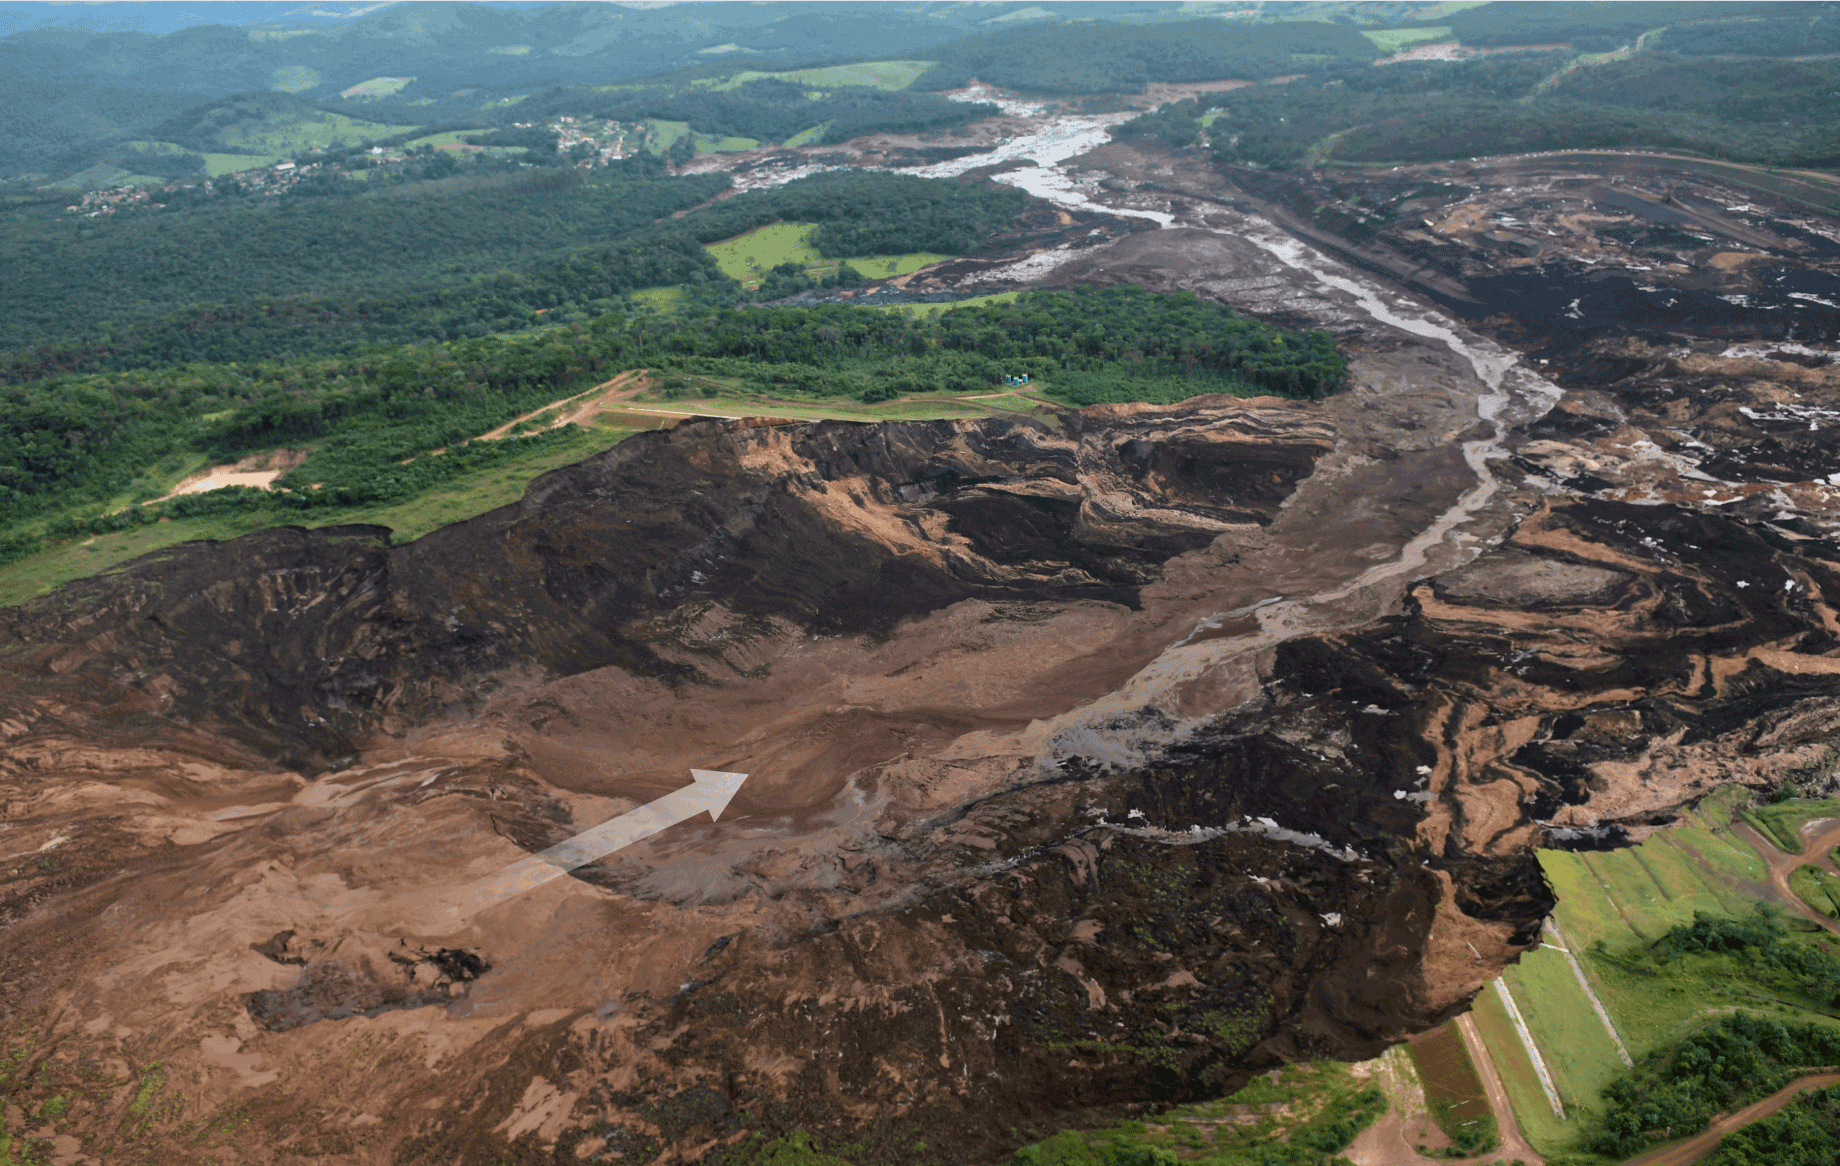 Photograph depicting the aftermath of the failure of Brumadinho Dam. An arrow indicates the breach.